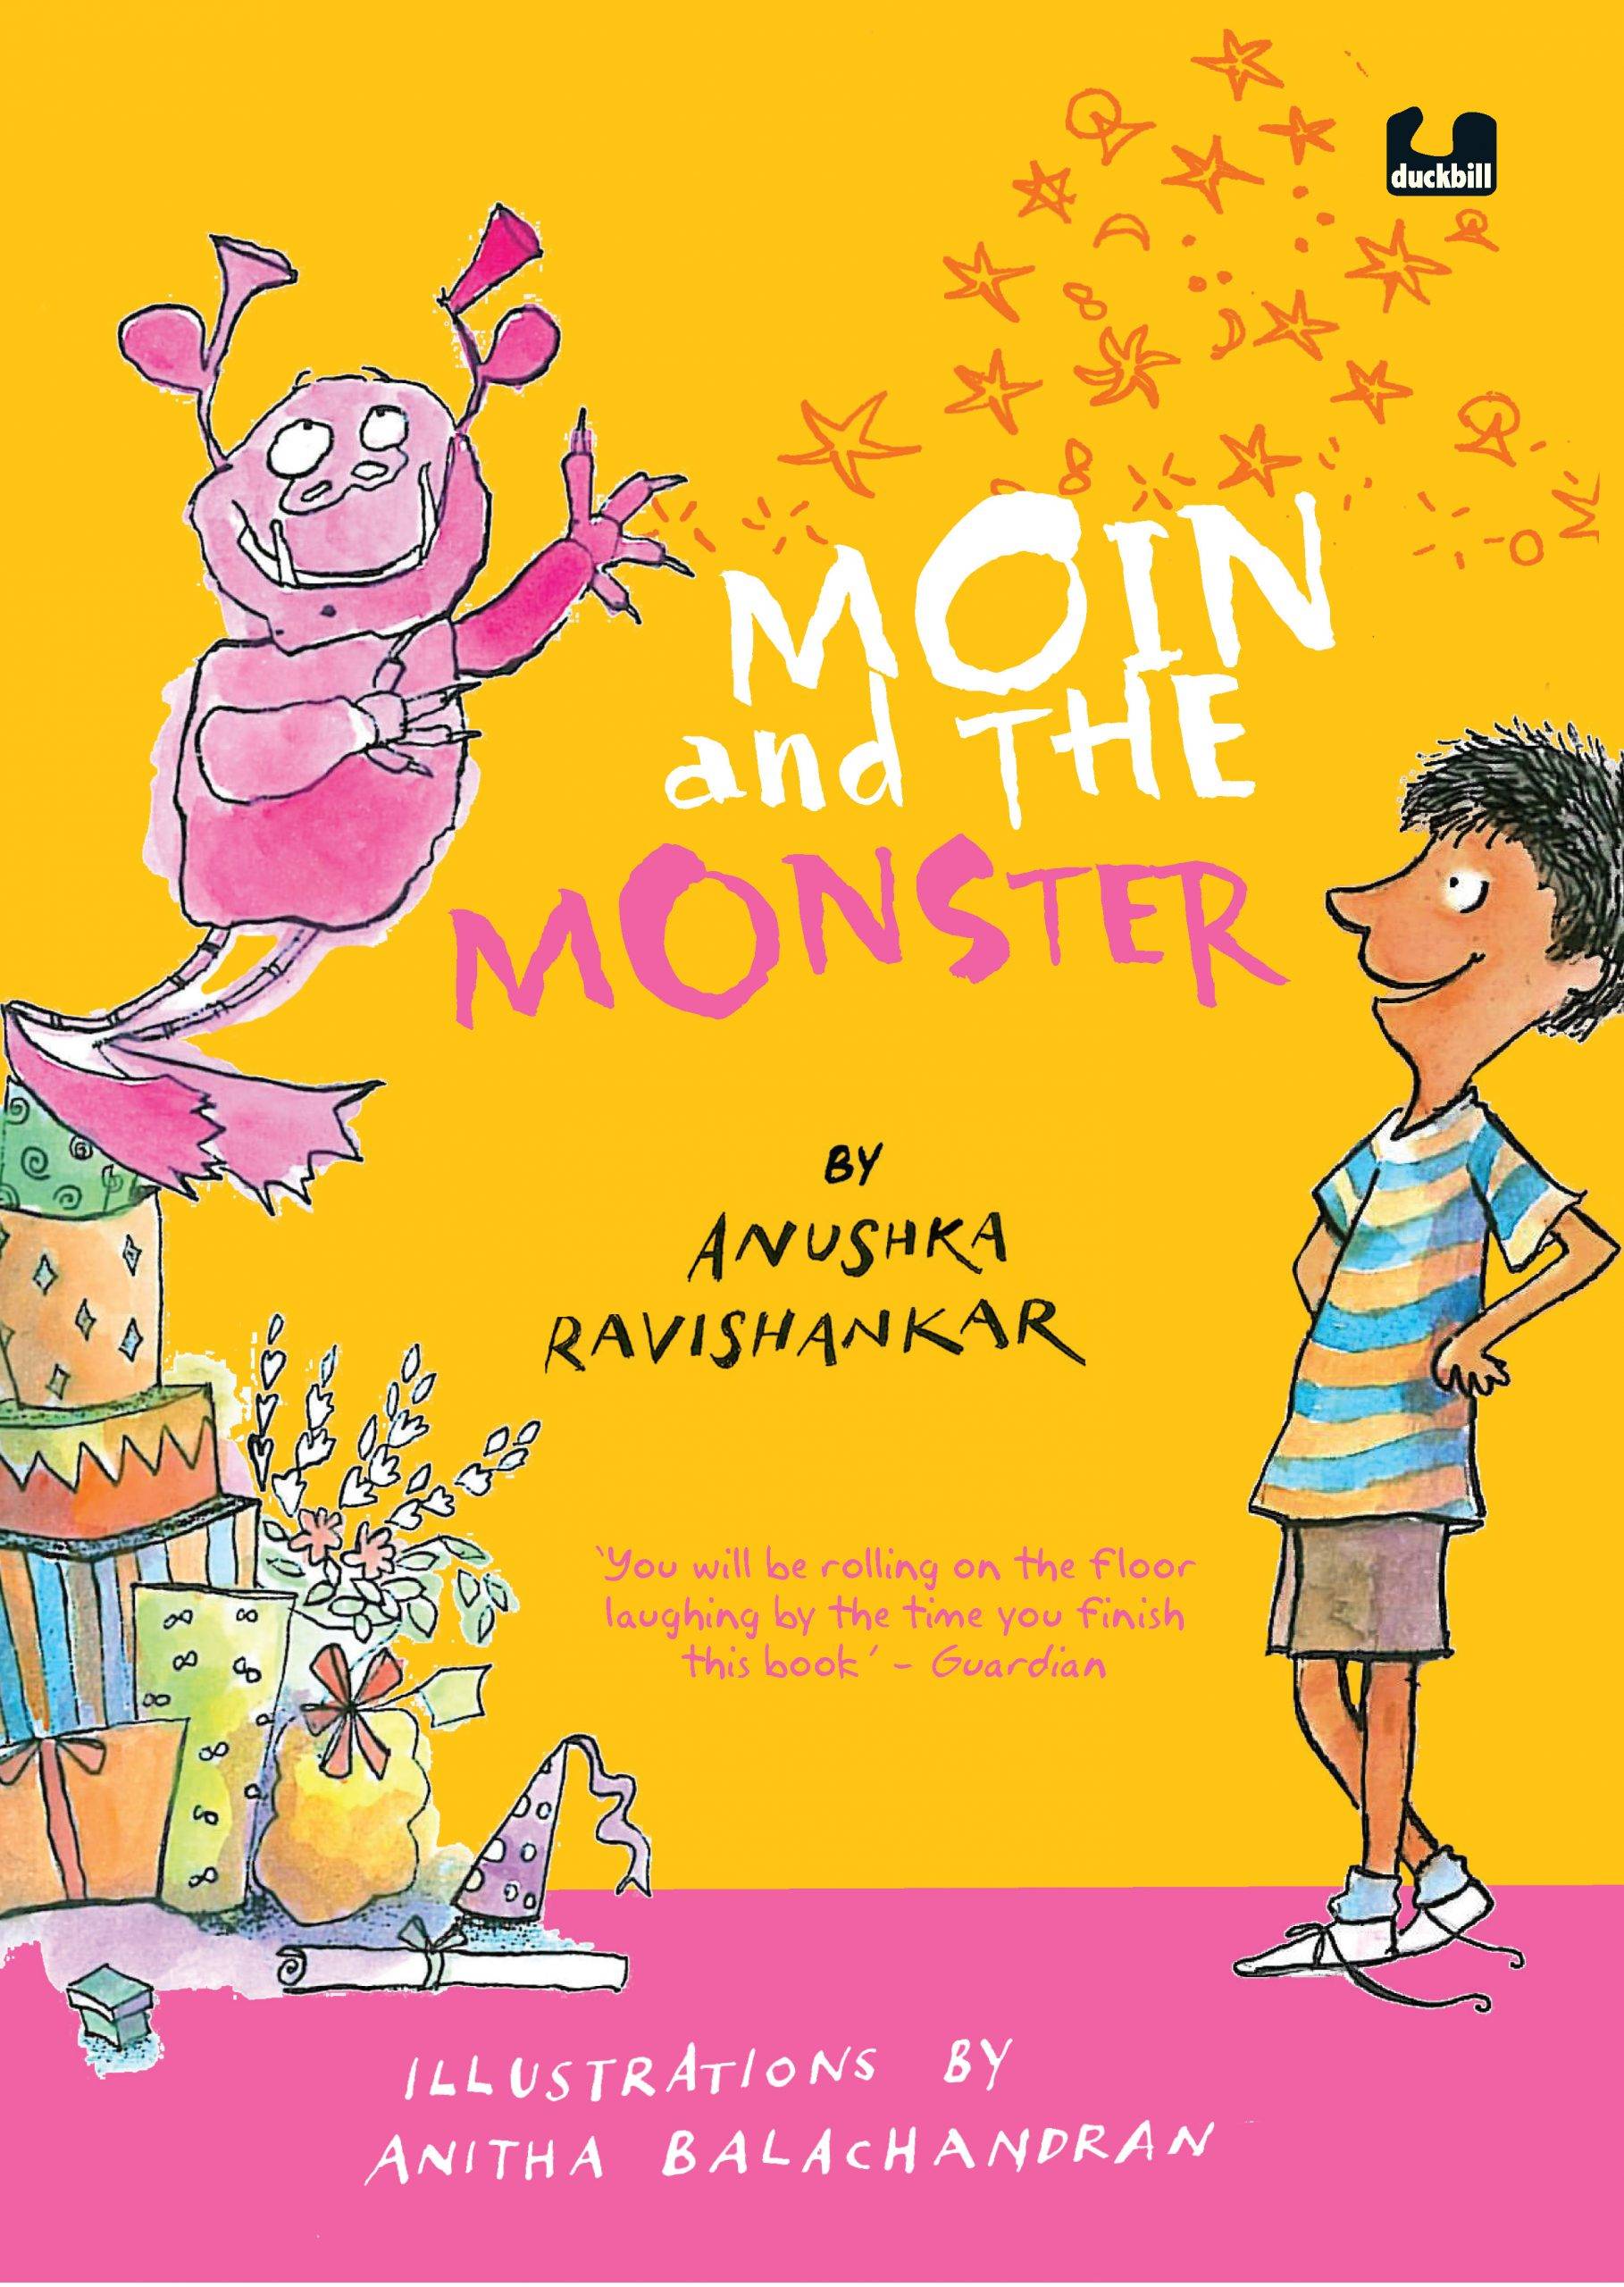 IMG : Moin and the monster